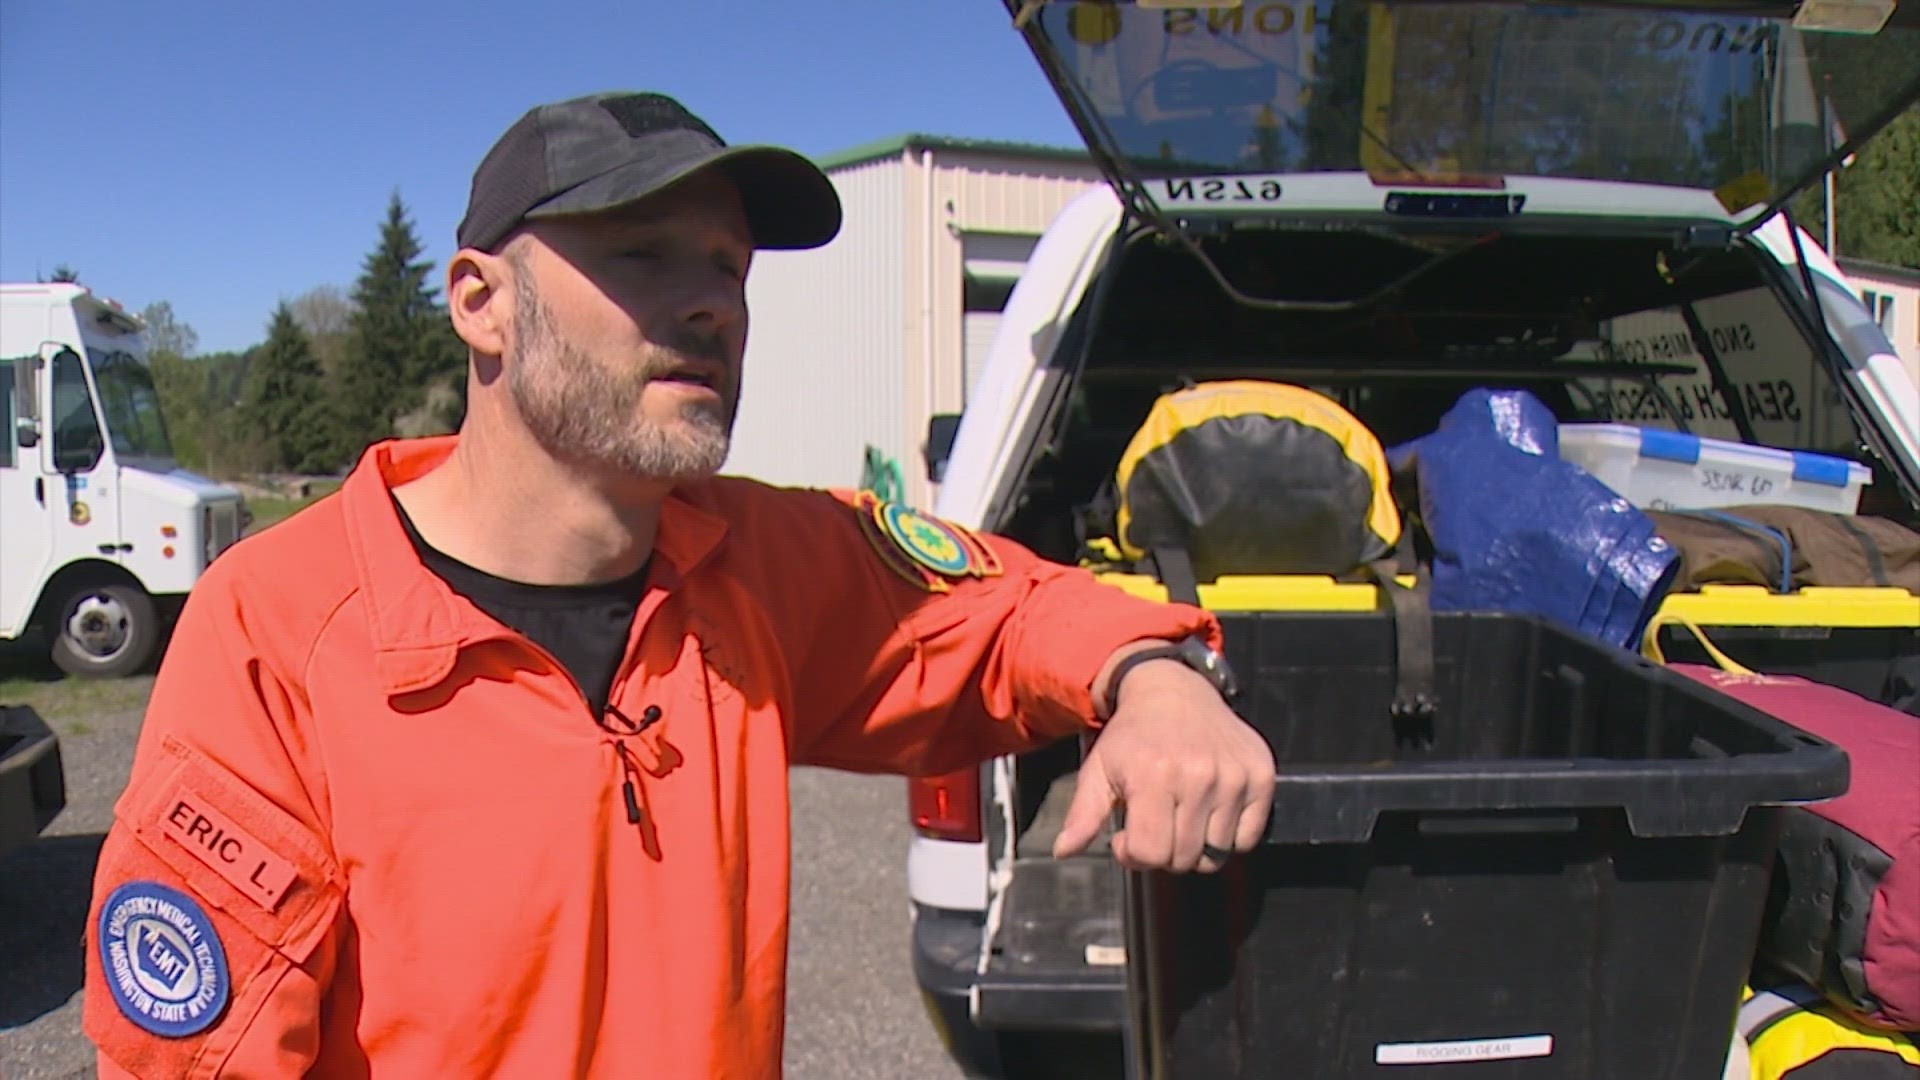 The Snohomish County Volunteer Search and Rescue unit needs more volunteers.